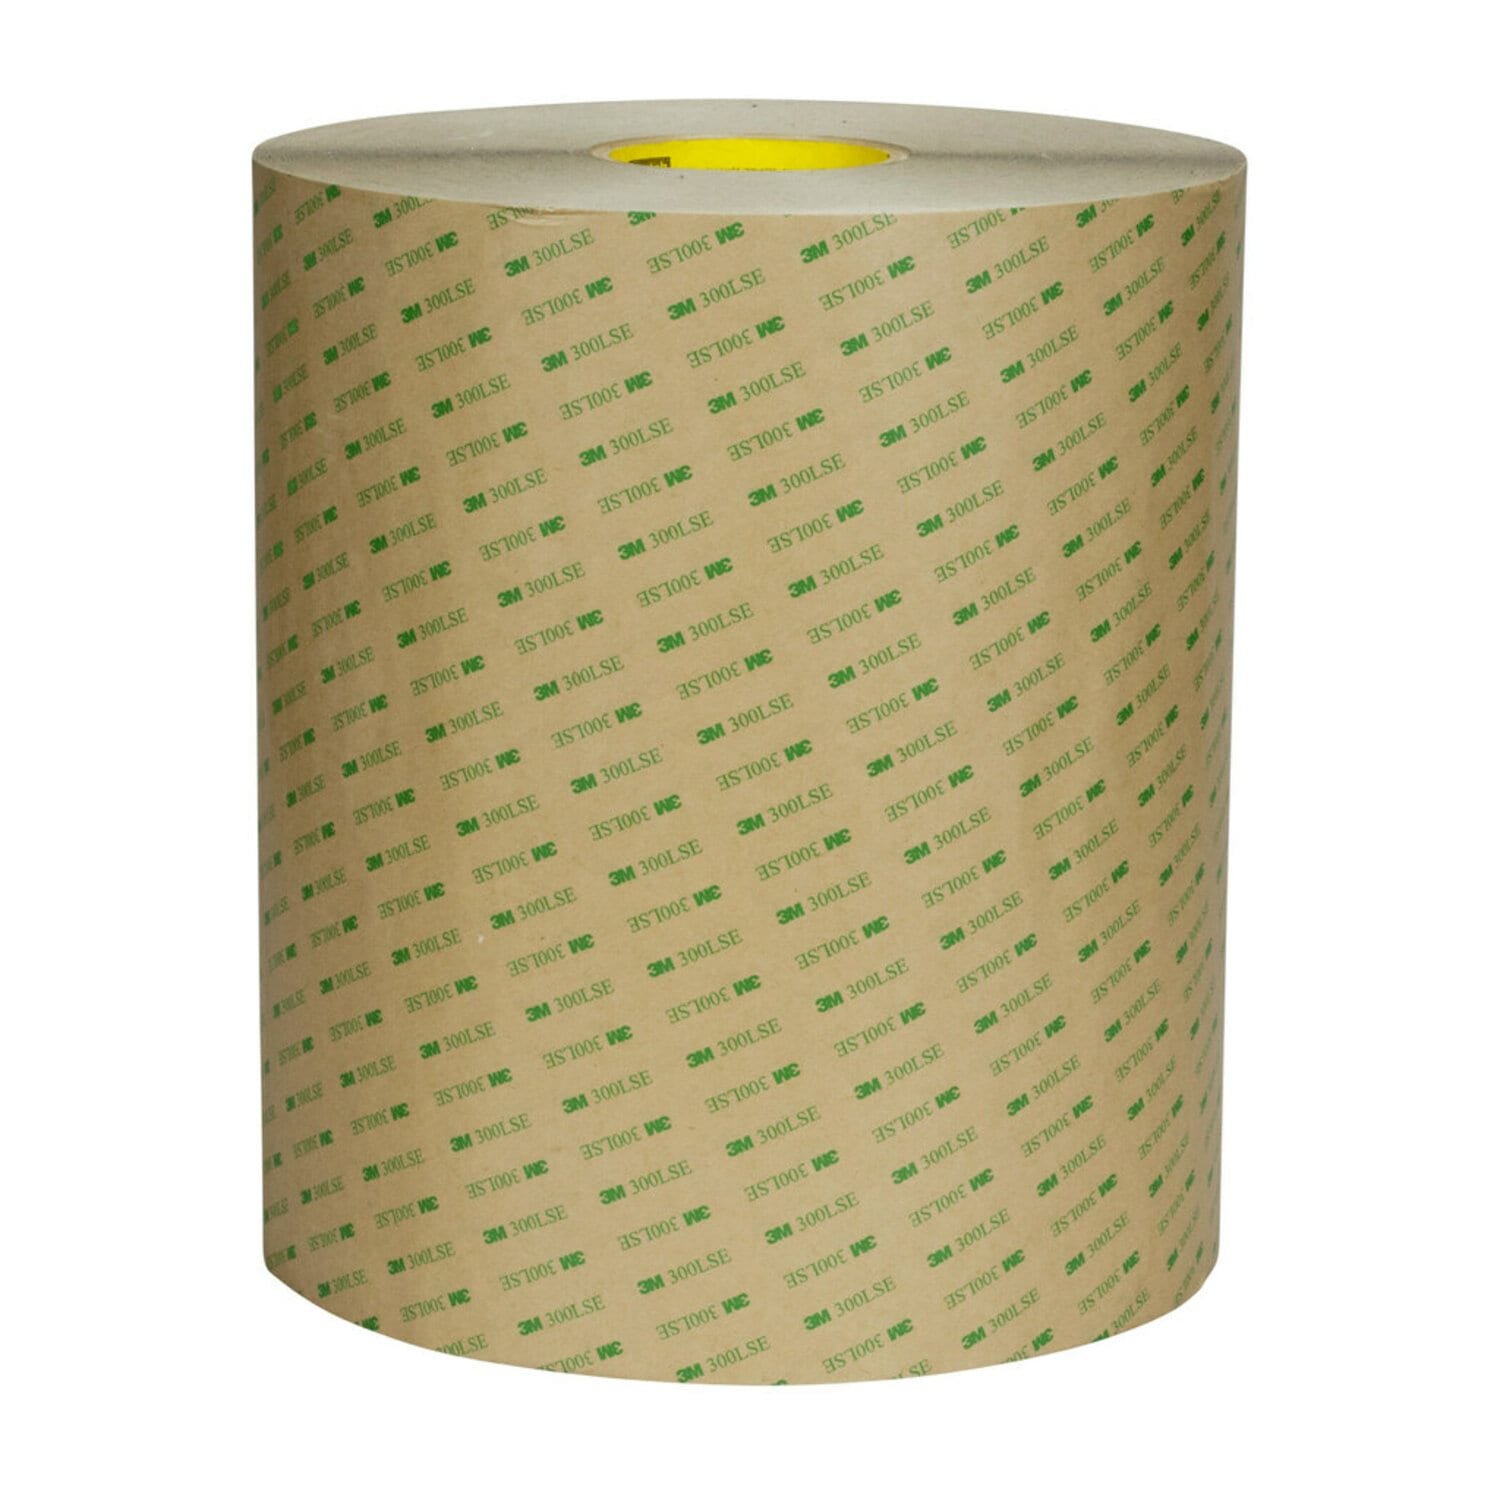 7100084685 - 3M Double Coated Tape 93020LE, Clear, 54 in x 360 yd, 7.9 mil, 1 roll
per case